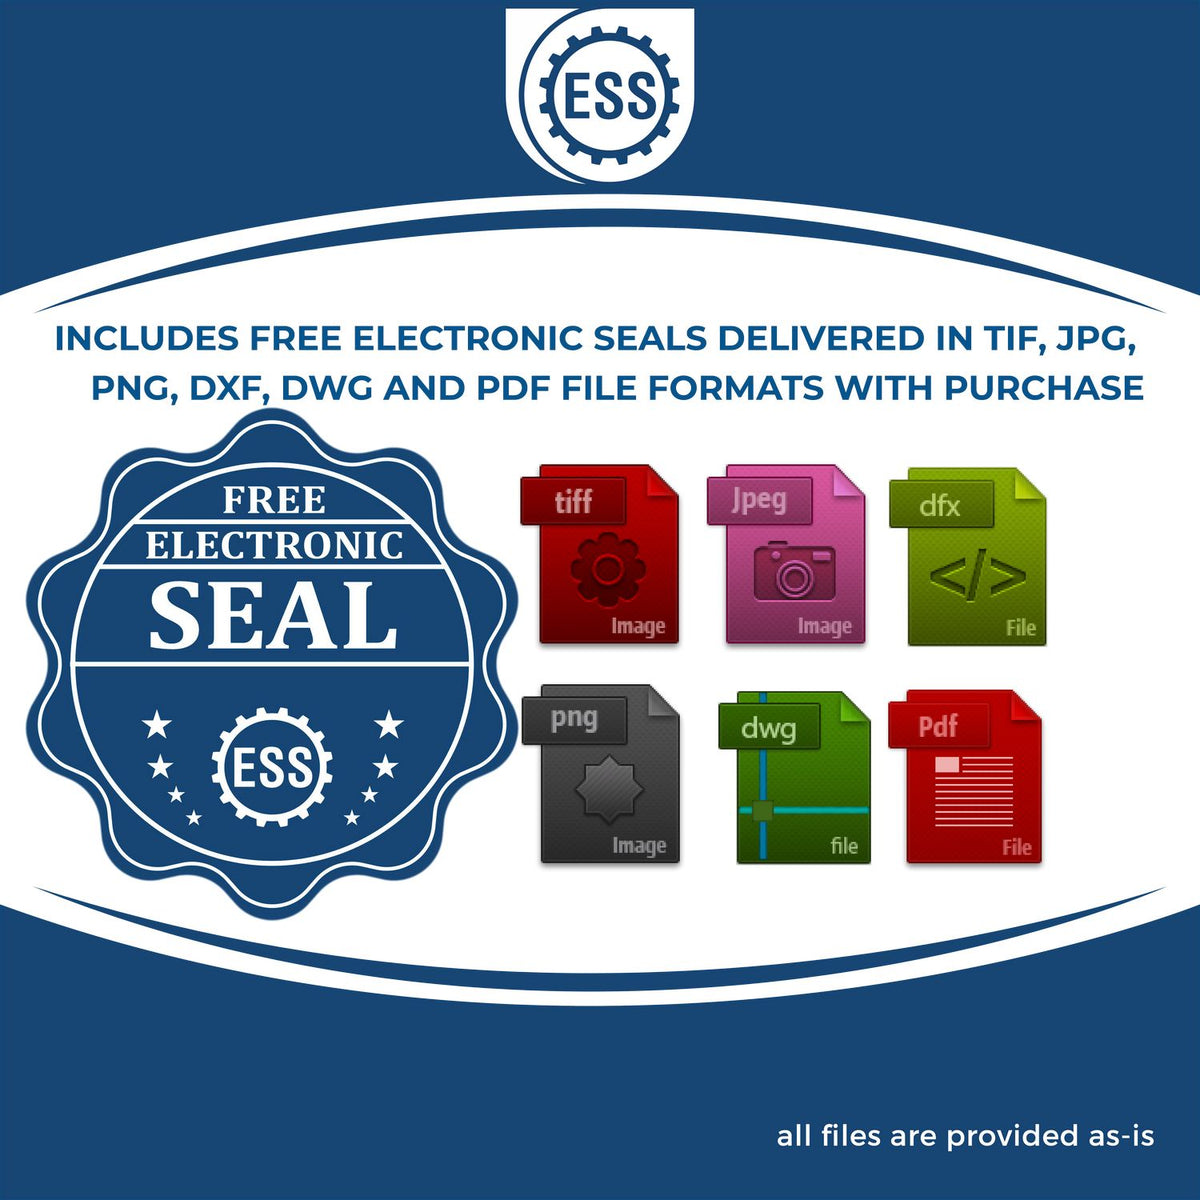 An infographic for the free electronic seal for the Slim Pre-Inked Texas Architect Seal Stamp illustrating the different file type icons such as DXF, DWG, TIF, JPG and PNG.